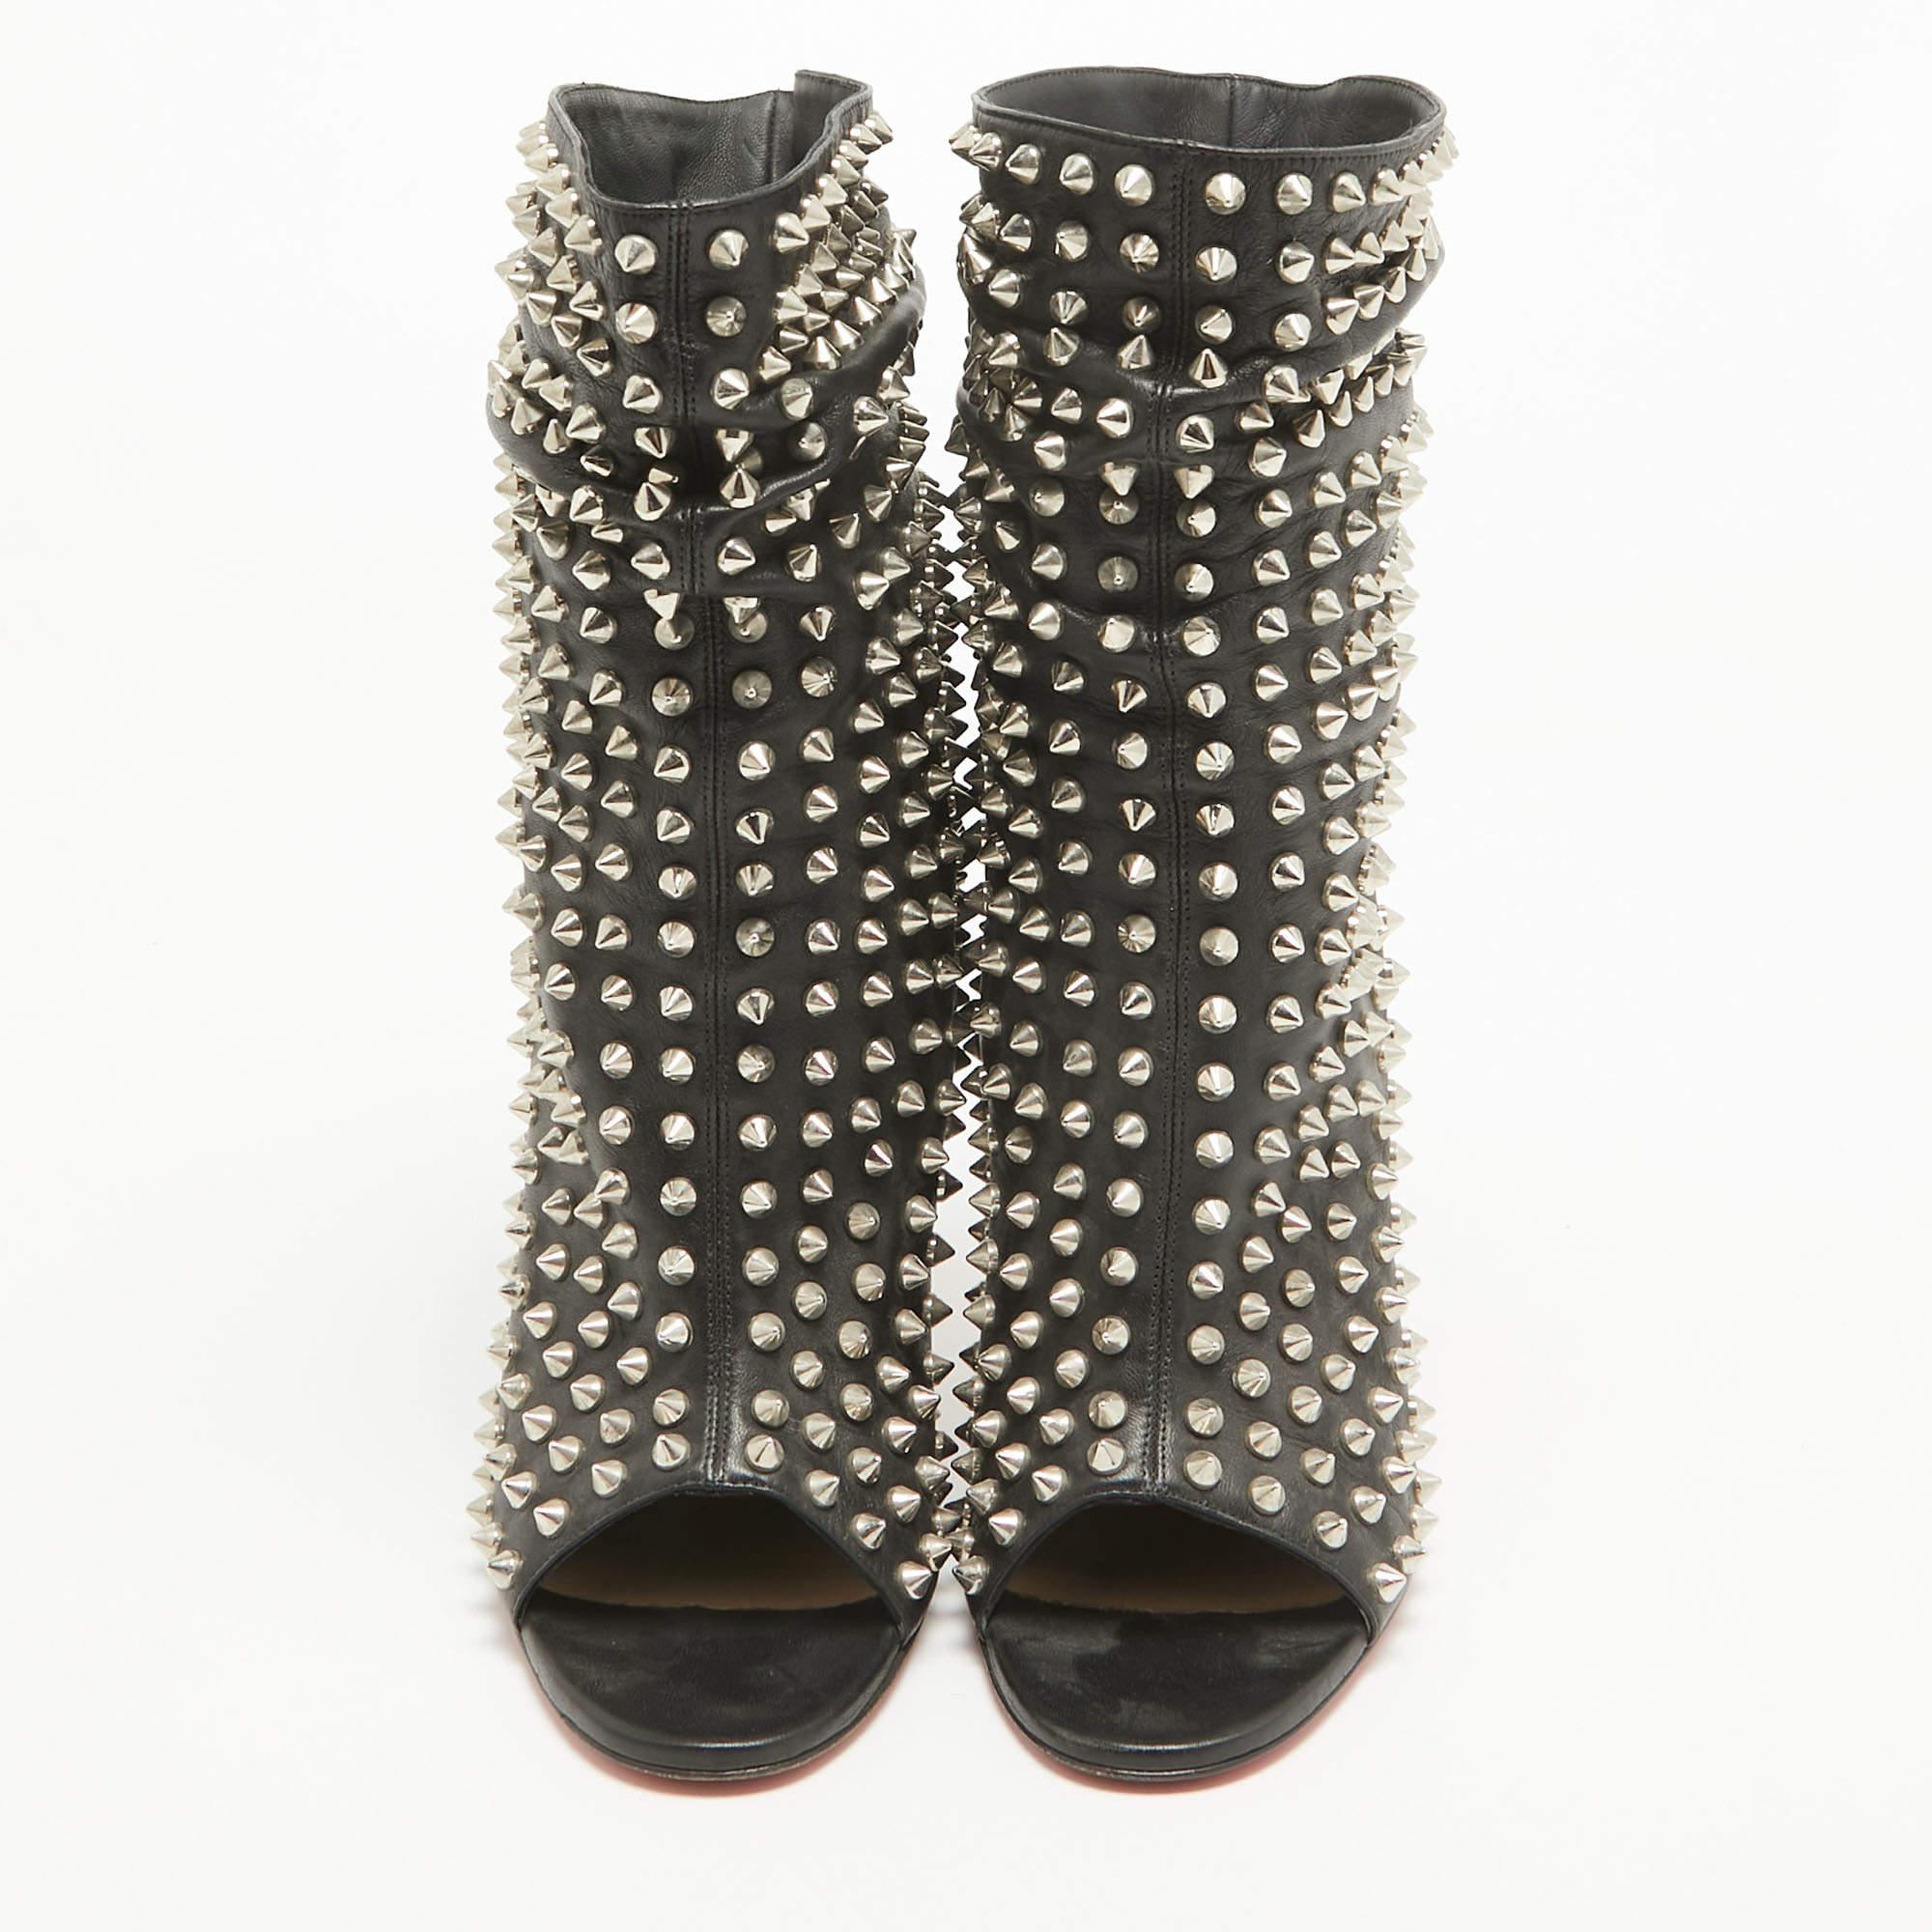 Bring out the rocker chic in you and stand out to make a statement wearing these stunning Christian Louboutin Guerilla ankle boots. Crafted in black leather with silver-tone spiked details all over, these shoes feature a slouchy design at the ankles